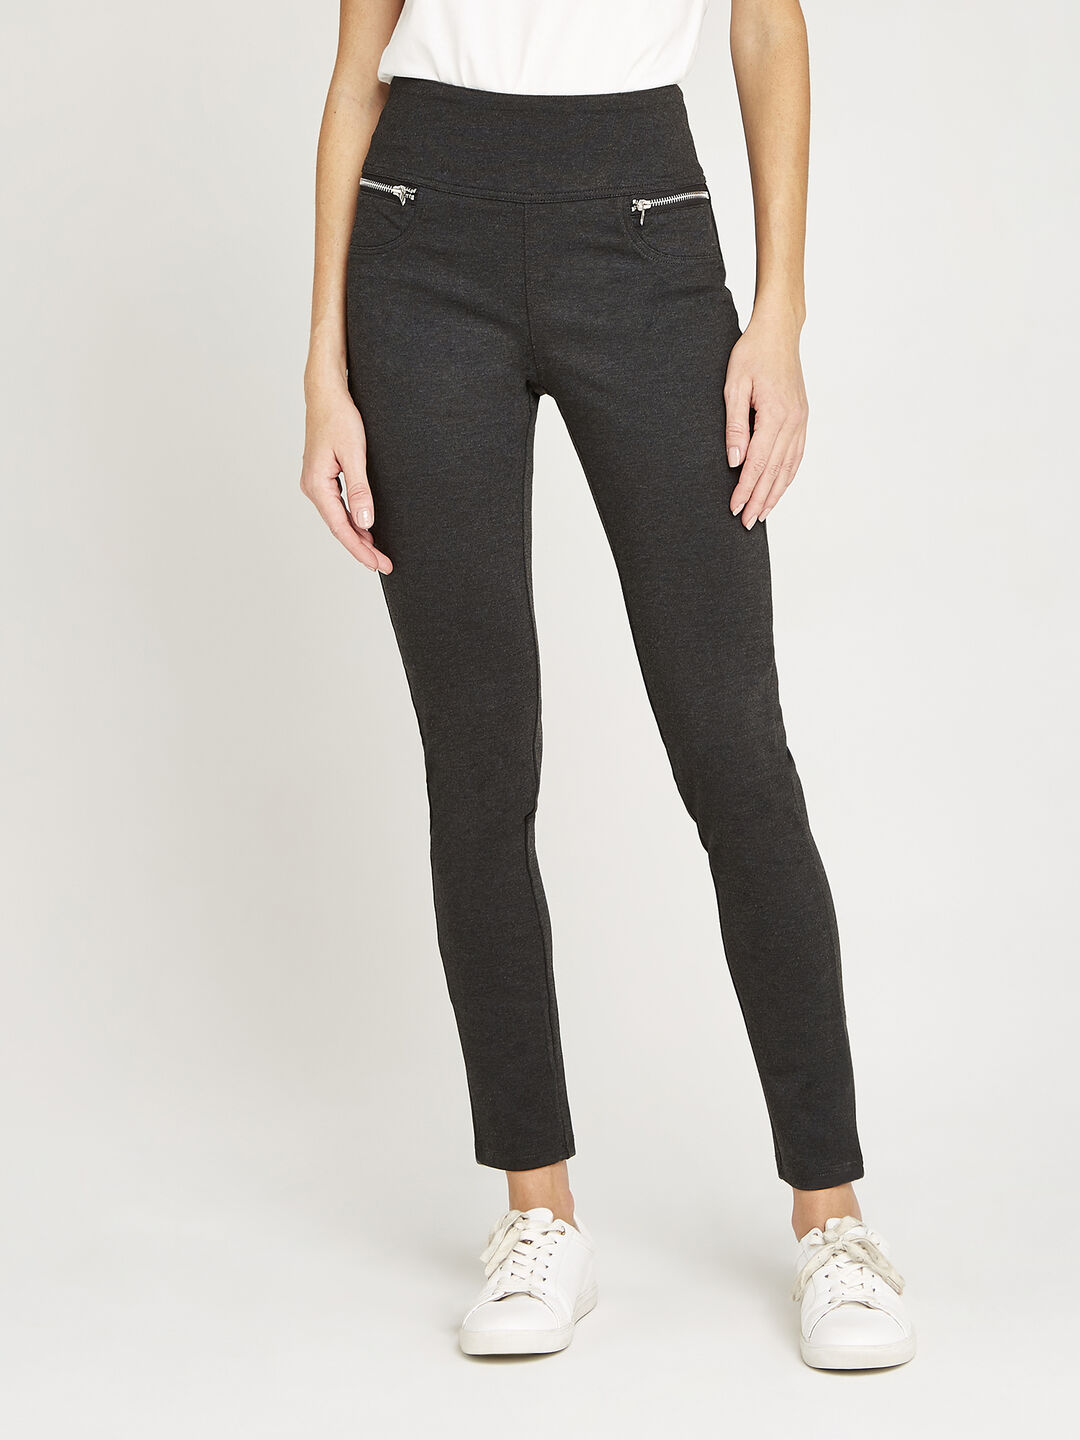 Buy Black Zipped Detail Skinny Trousers from Next Luxembourg